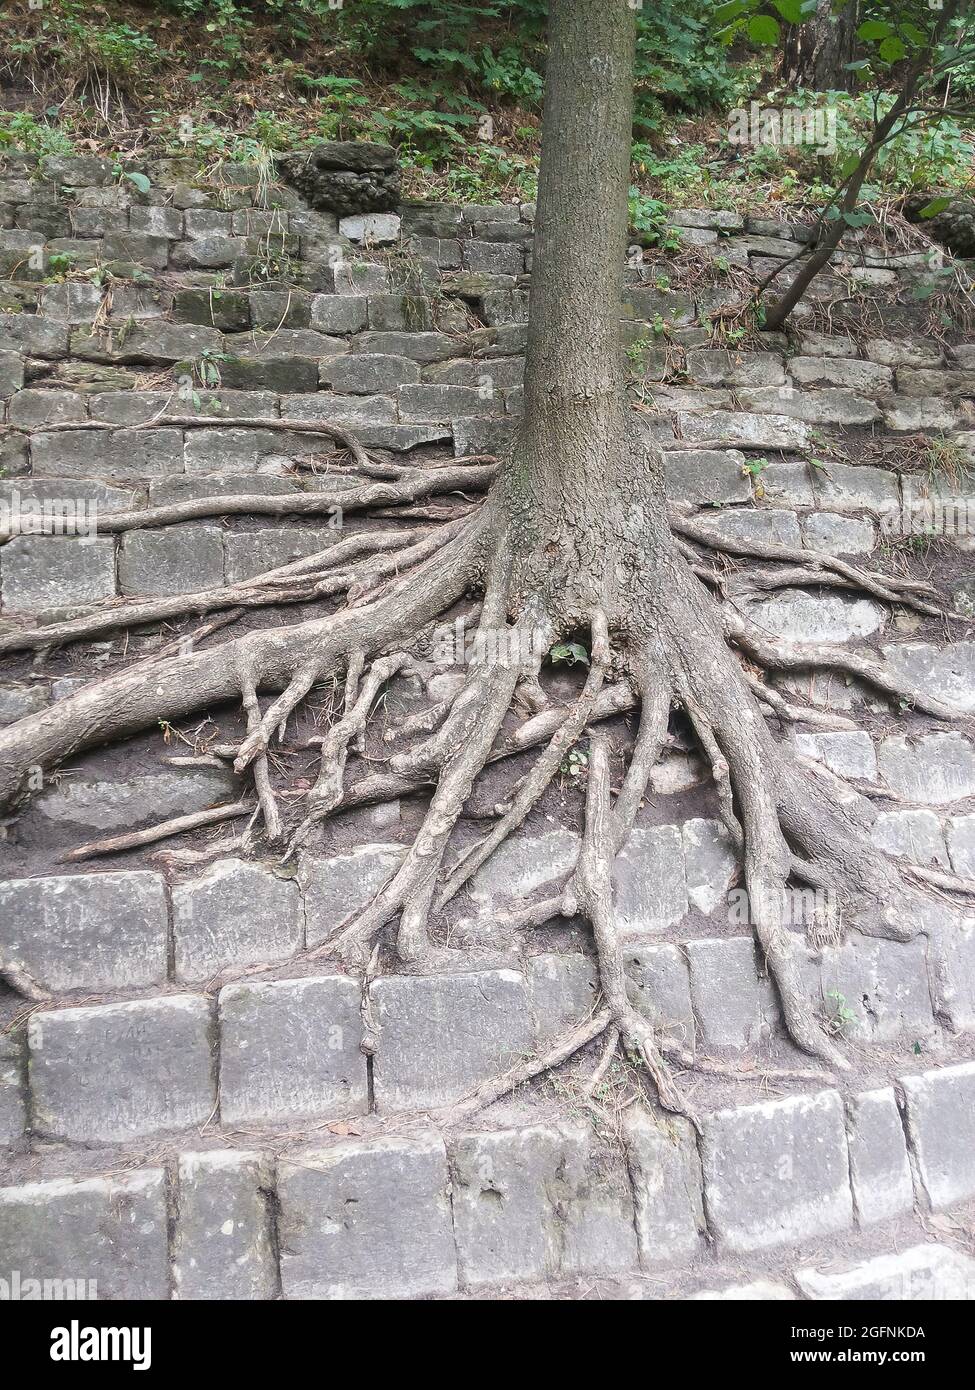 The tree grows on the stone slope of the stepped pyramid. Numerous long branches of roots crawl over the stones. Stock Photo